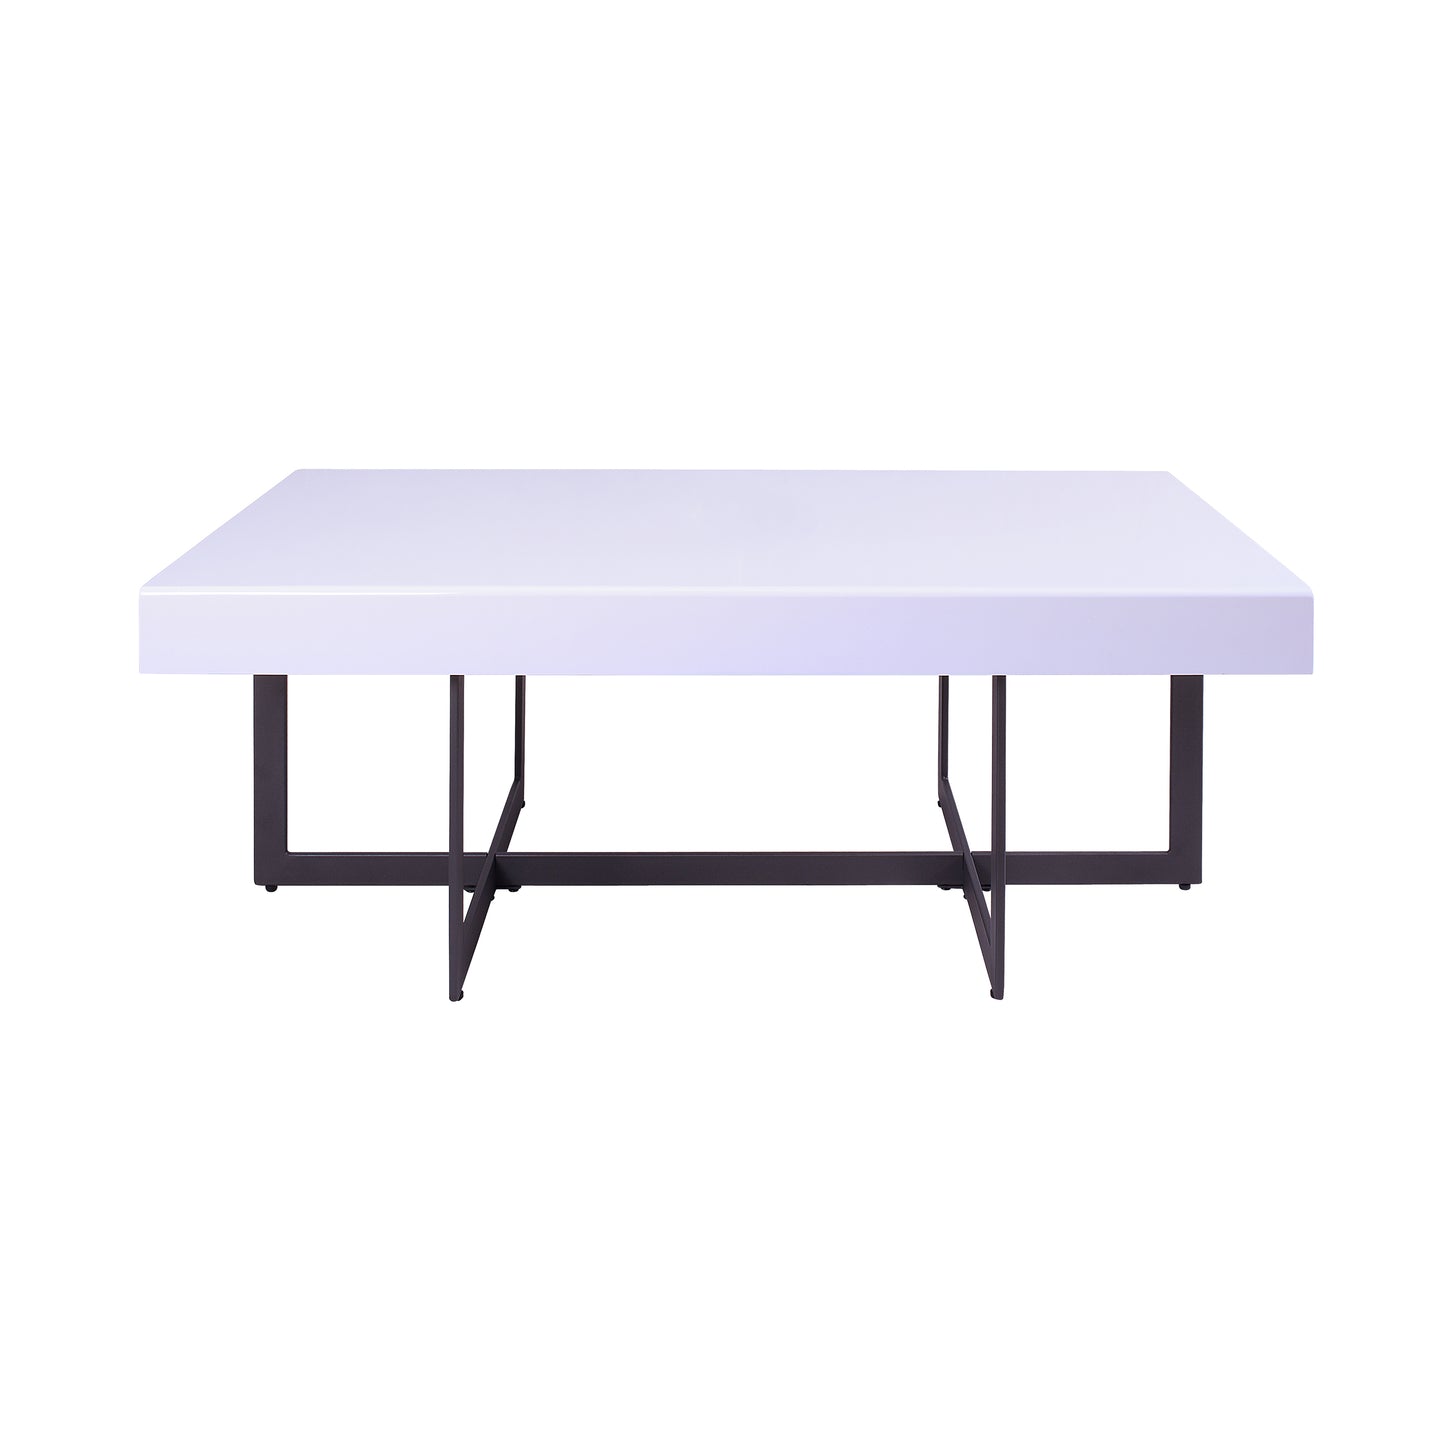 Front-facing coffee table only from a two-piece modern white high gloss and gunmetal storage coffee table set with hidden drawers on a white background